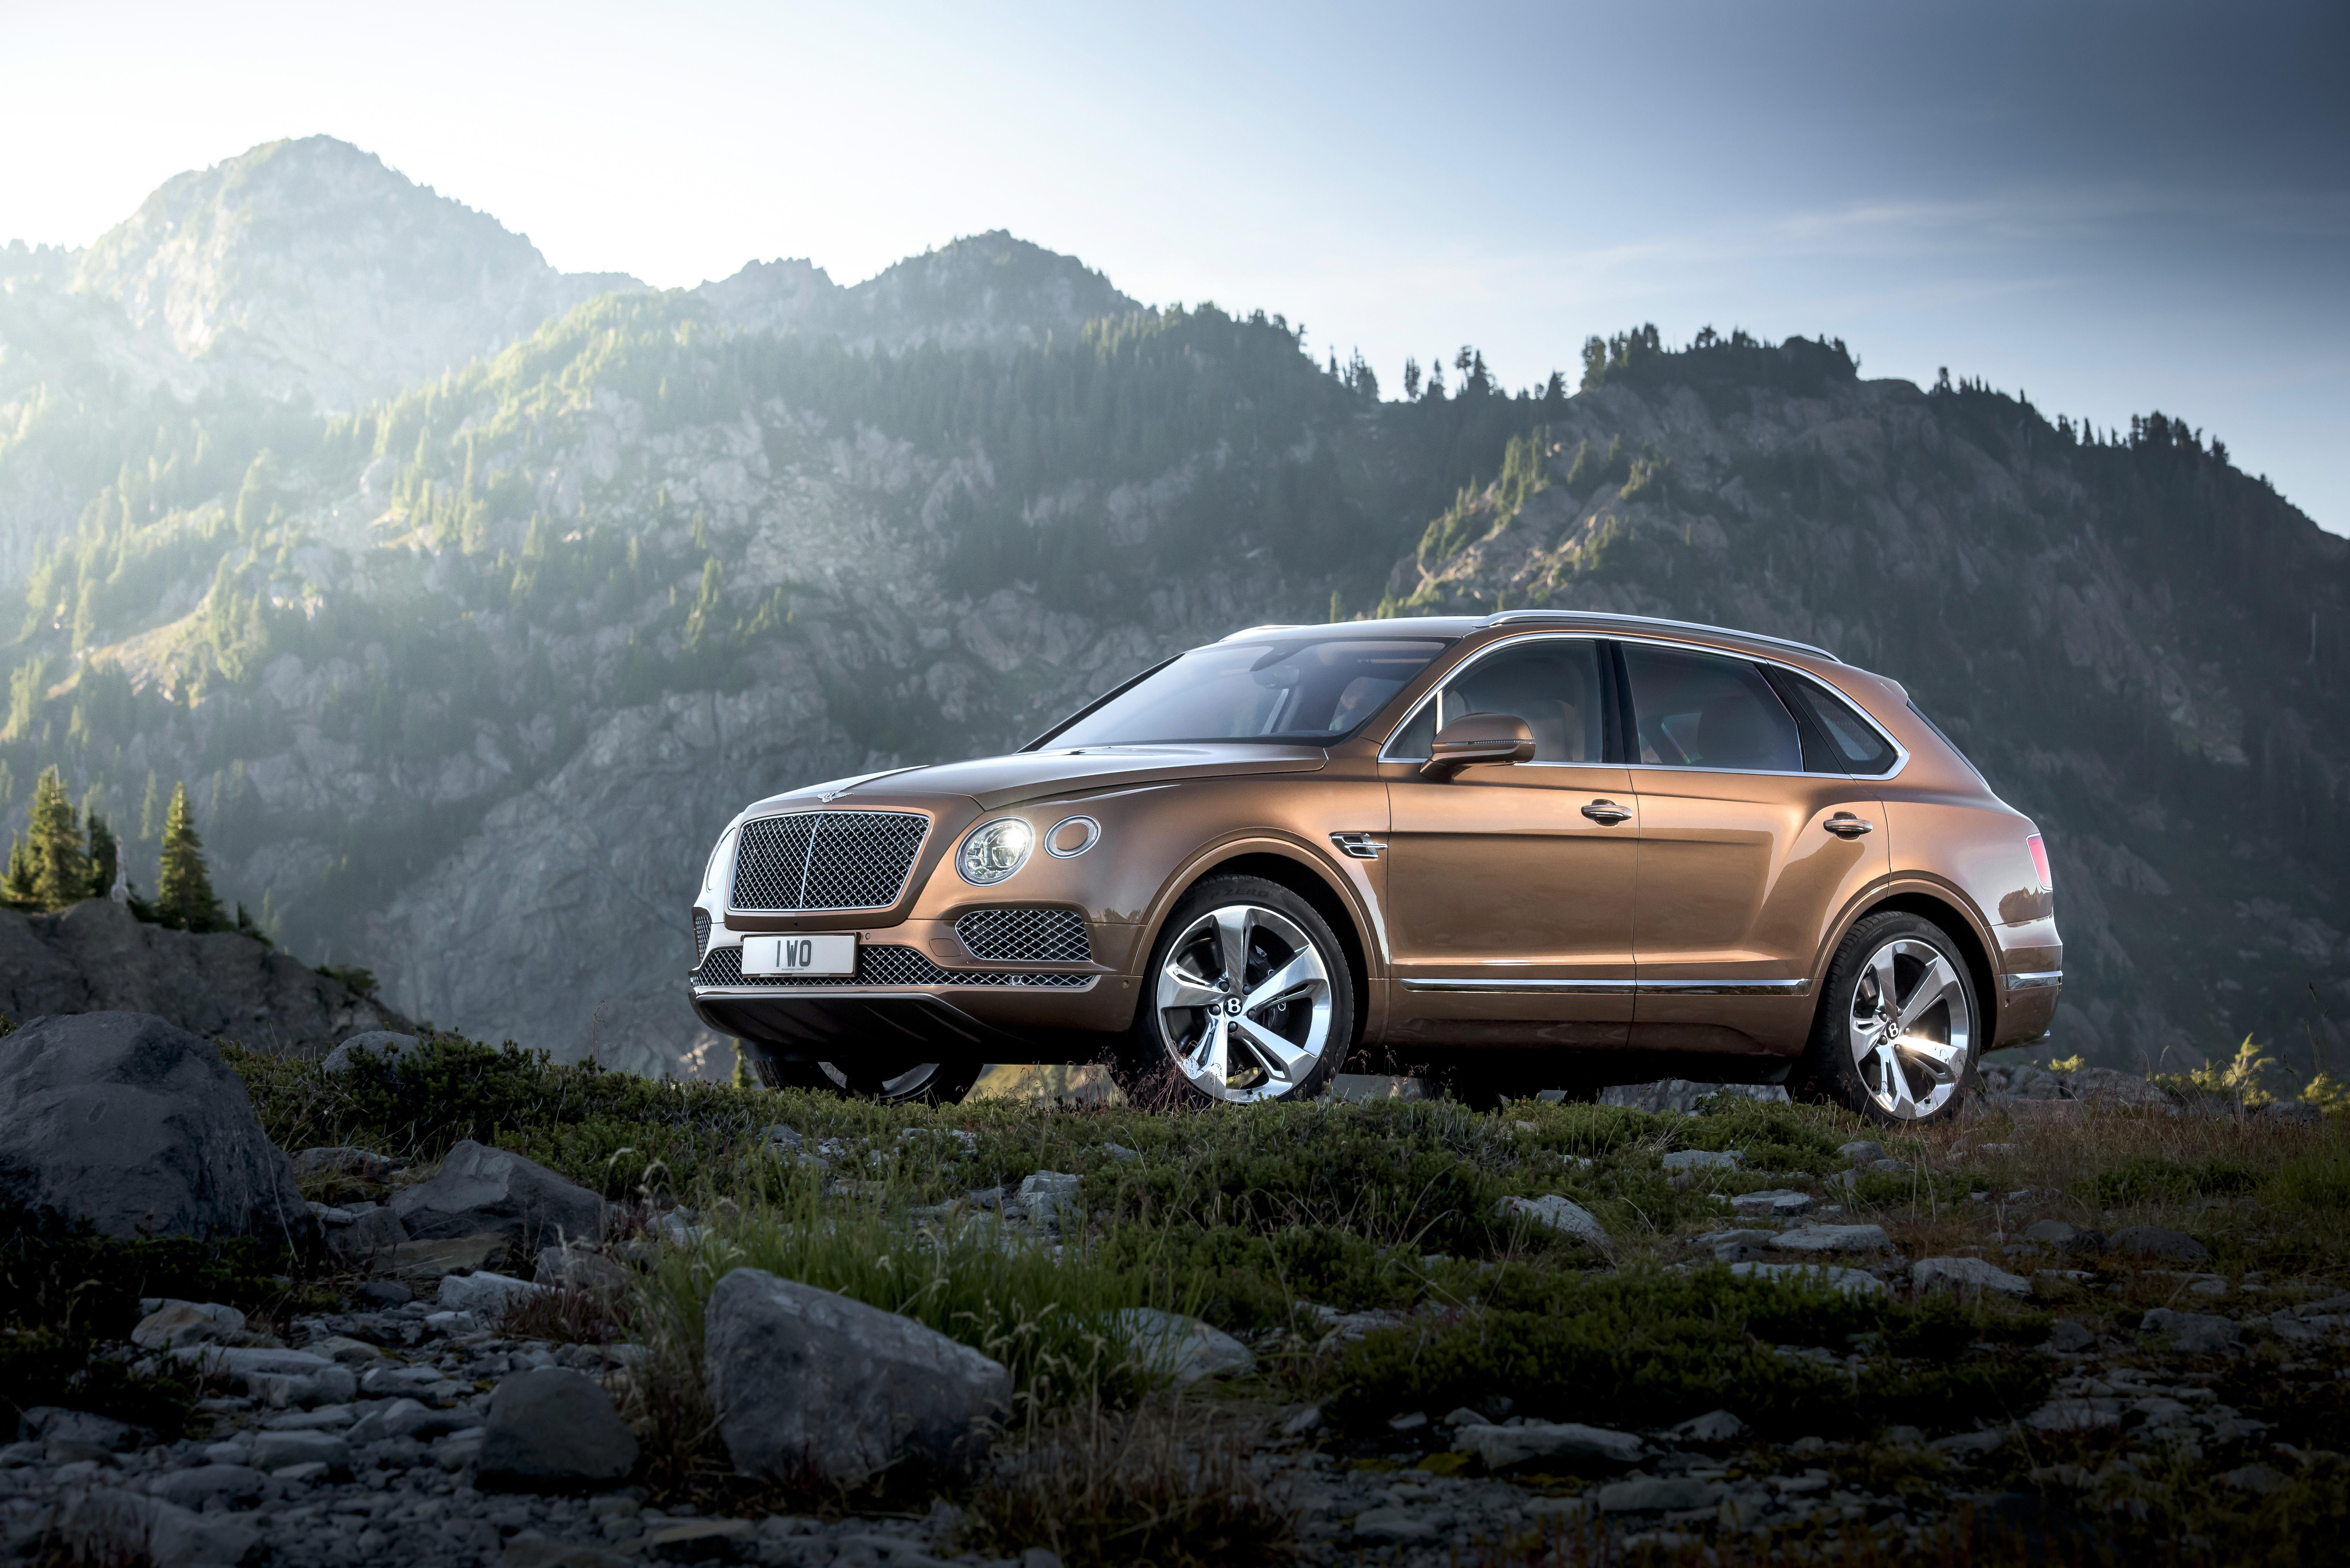 This is the Bentley Bentayga, the fastest SUV on the planet